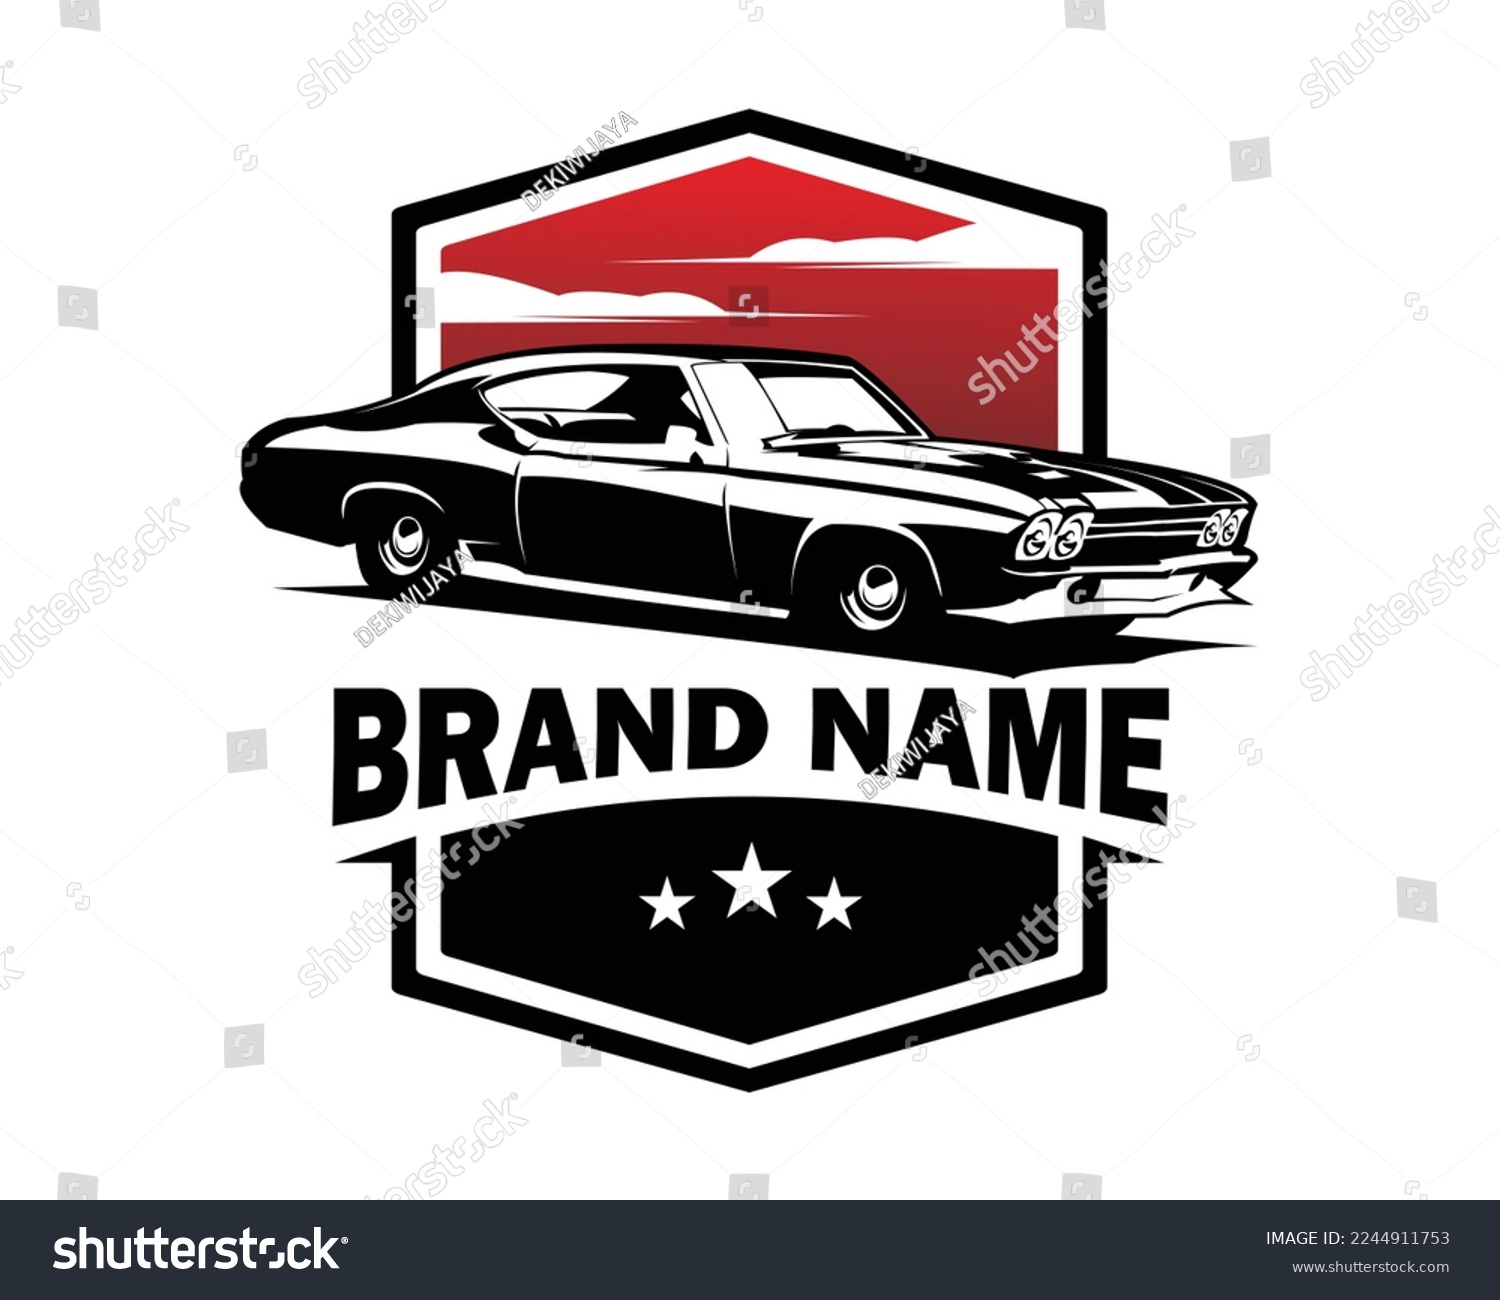 SVG of old chevy camaro car logo. view from side isolated white background. Best for badge, emblem, concept, design sticker, t-shirt and auto industry. available in eps 10. svg